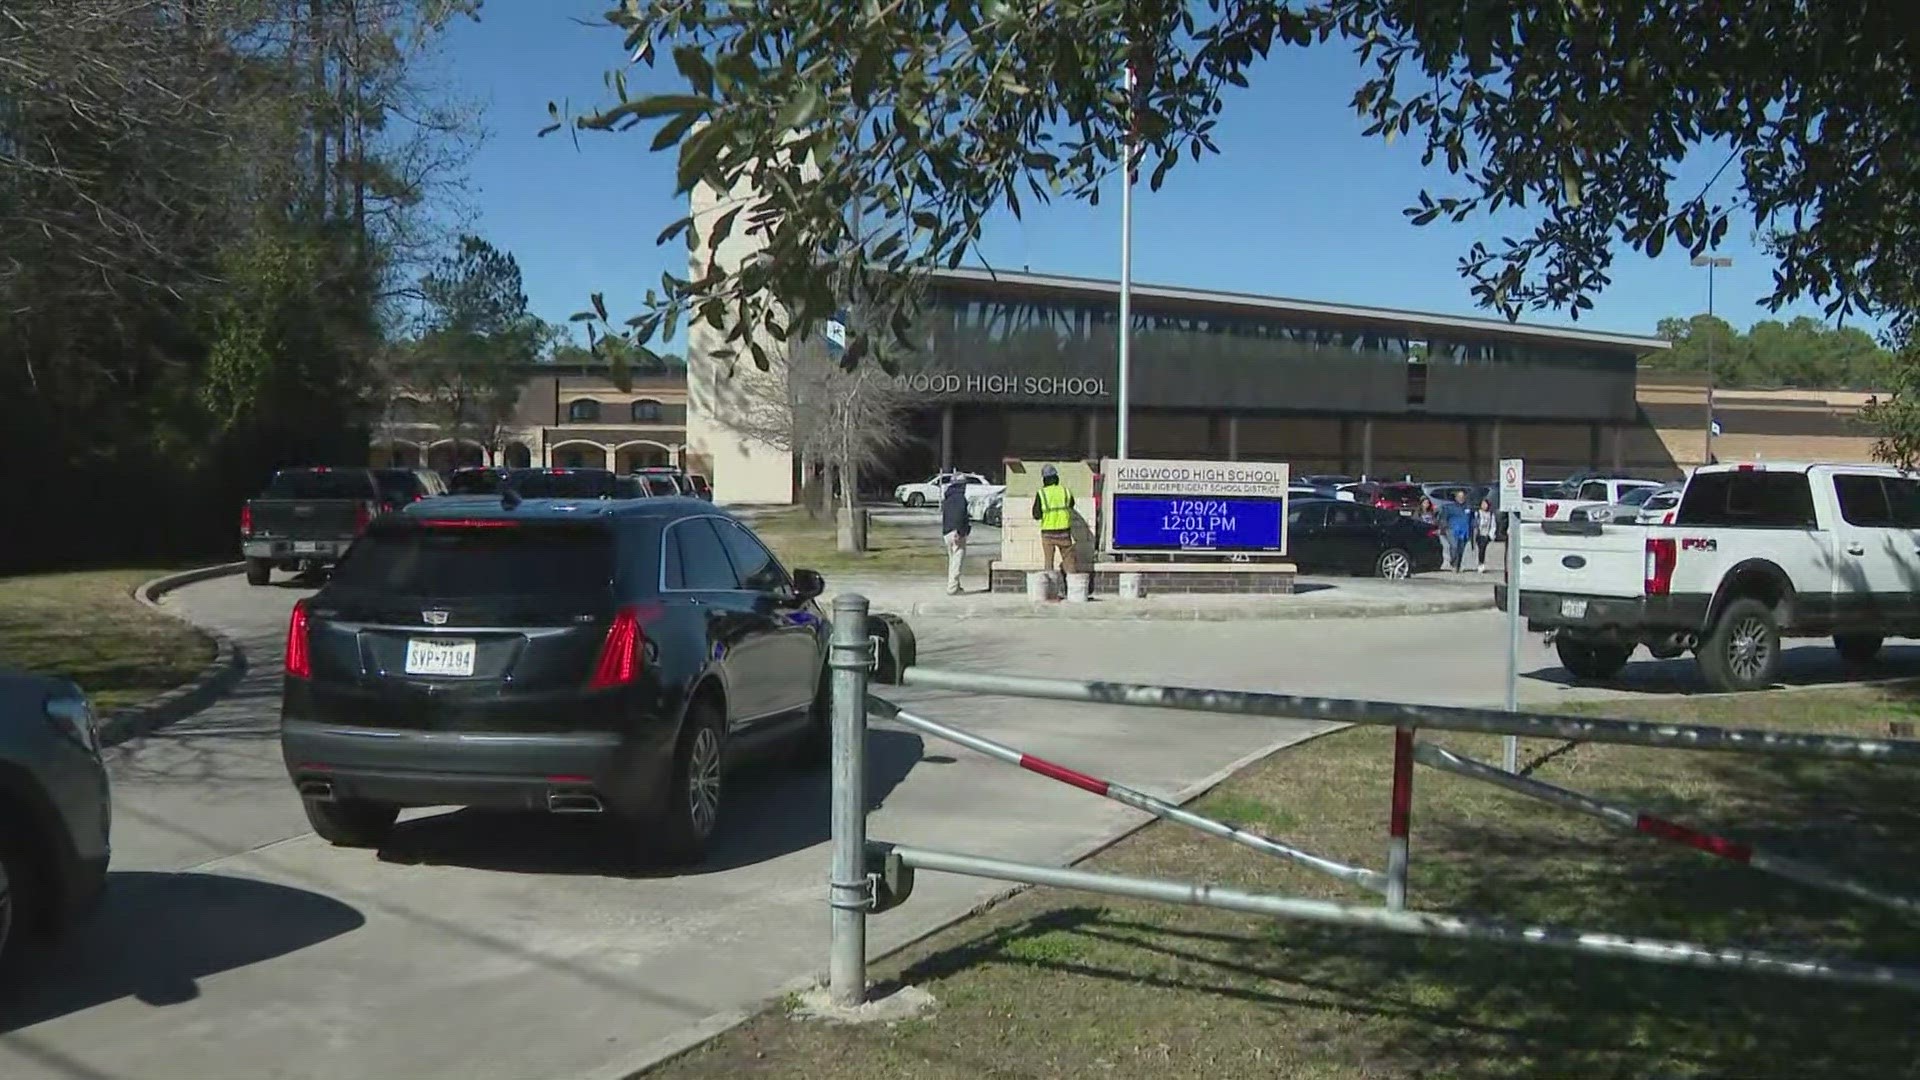 Lockdown at local high school over report of weapon